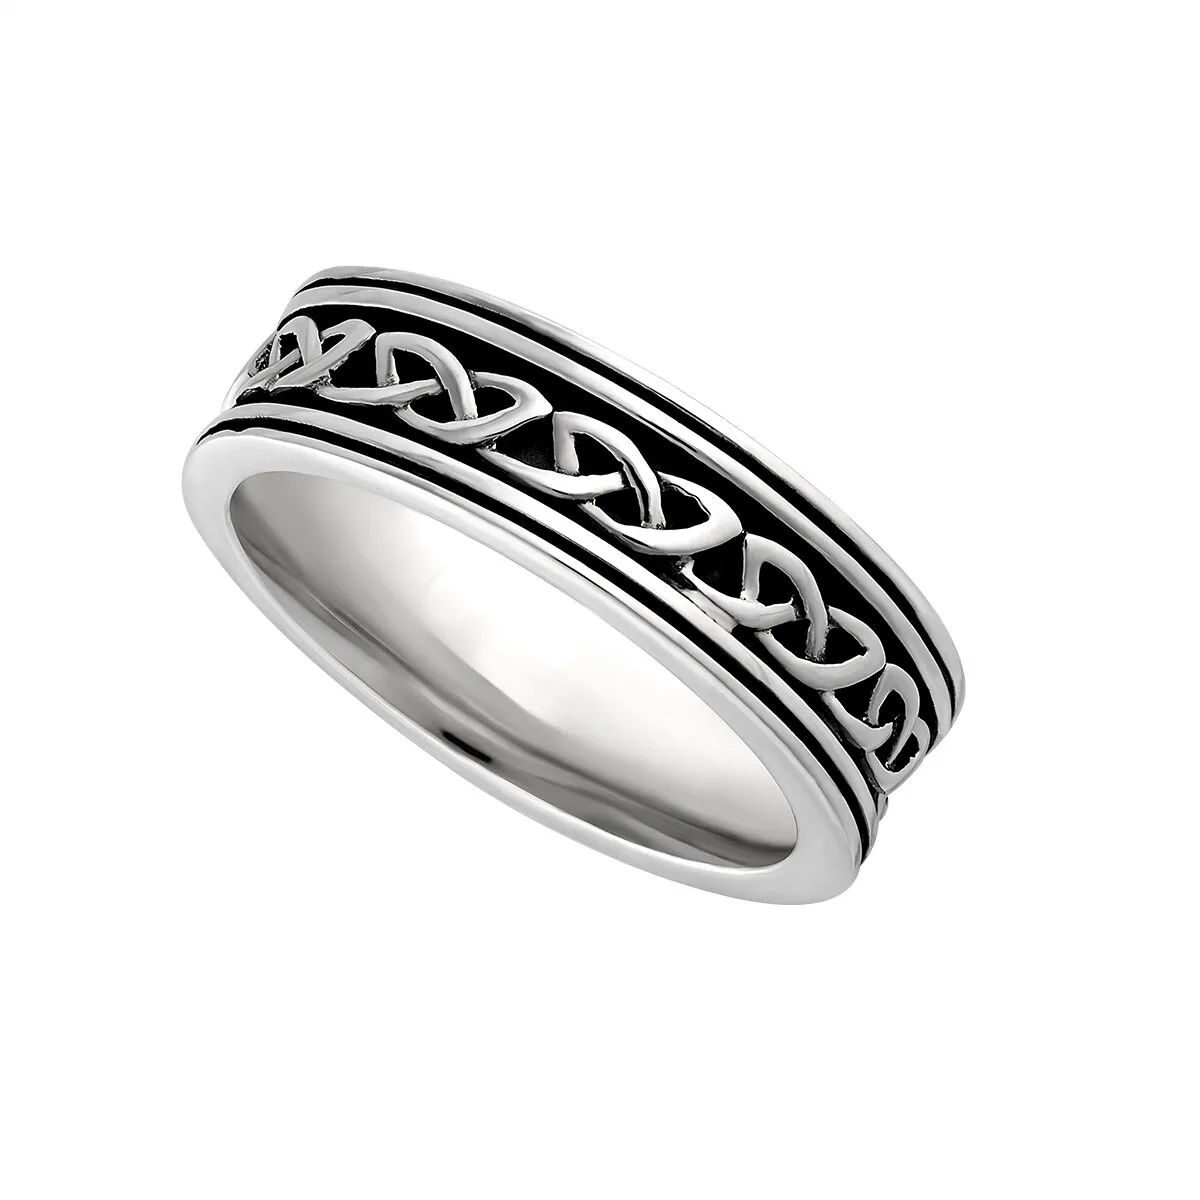 Ladies Oxidised Sterling Silver Celtic Knot Ring...